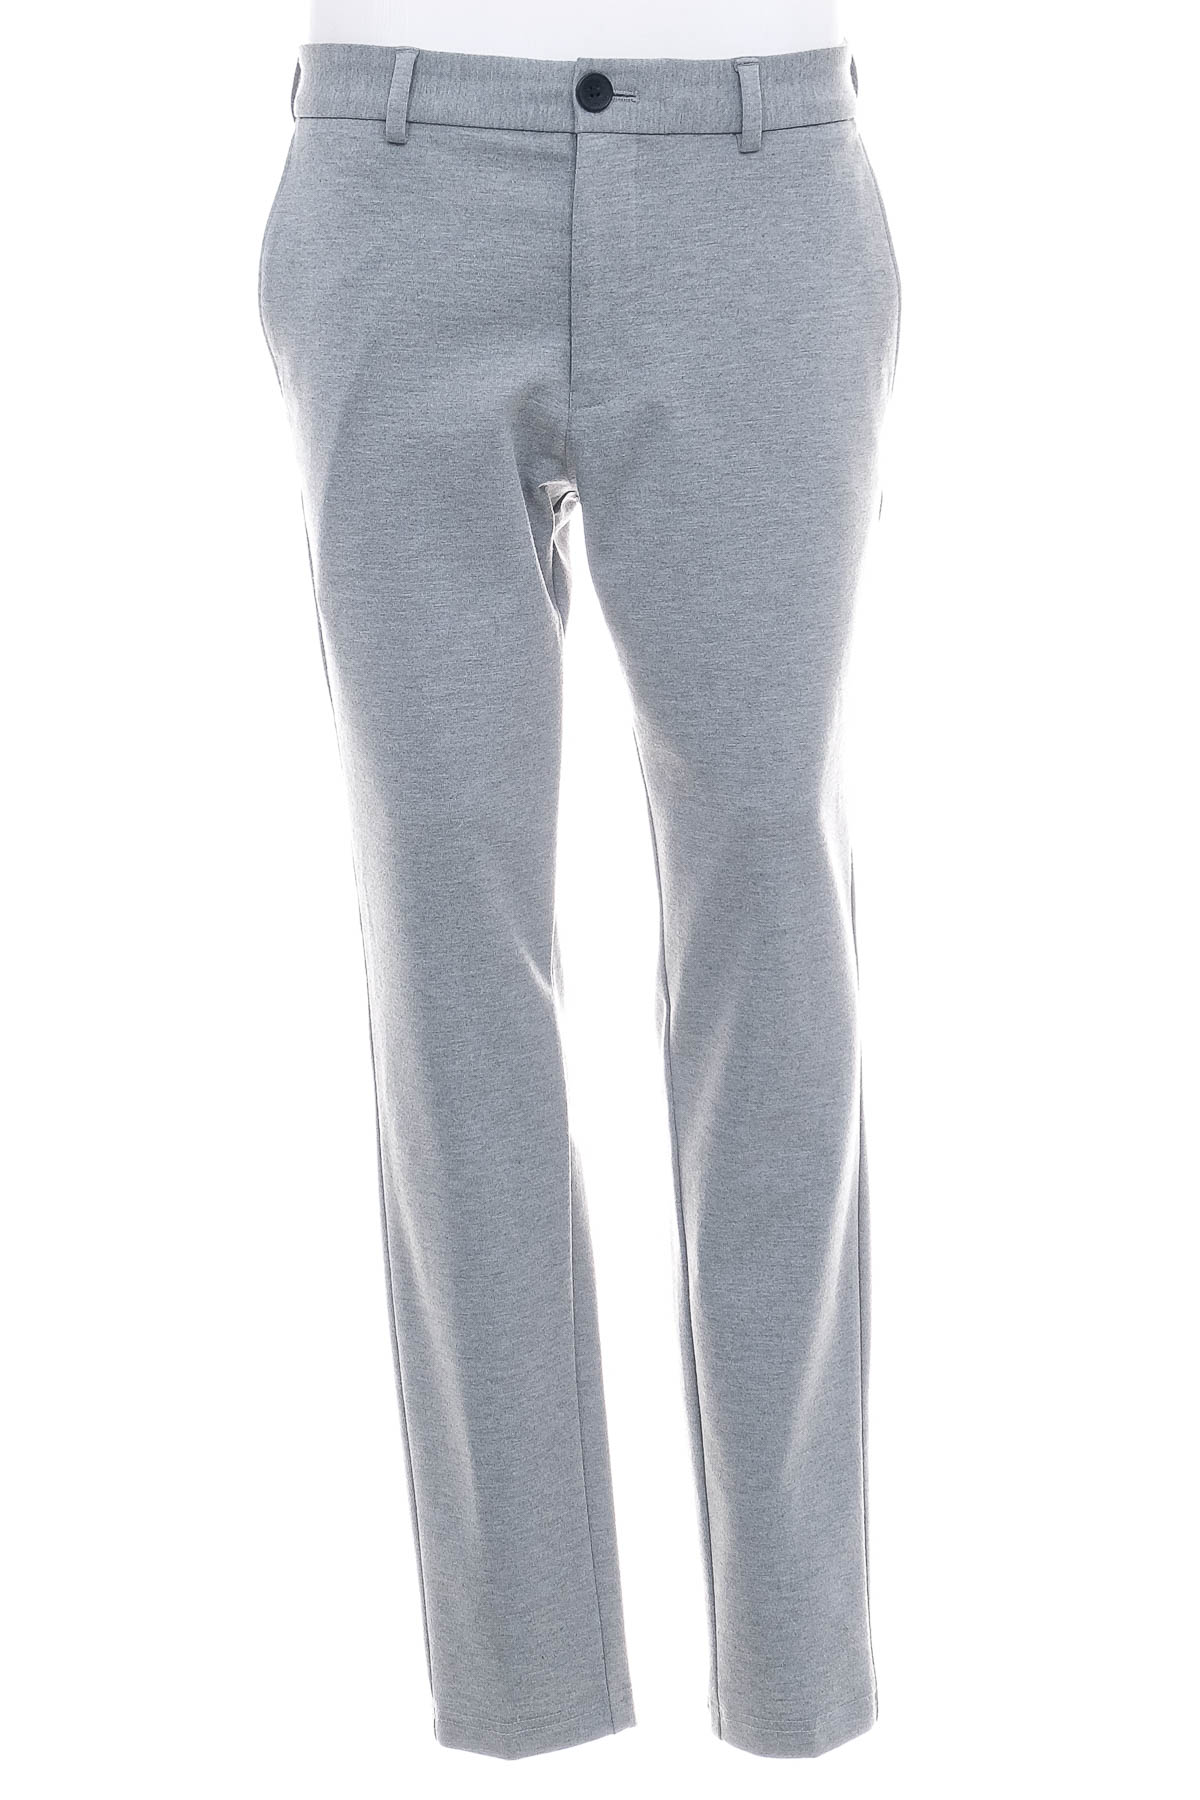 Men's trousers - PERFORM COLLECTION - 0